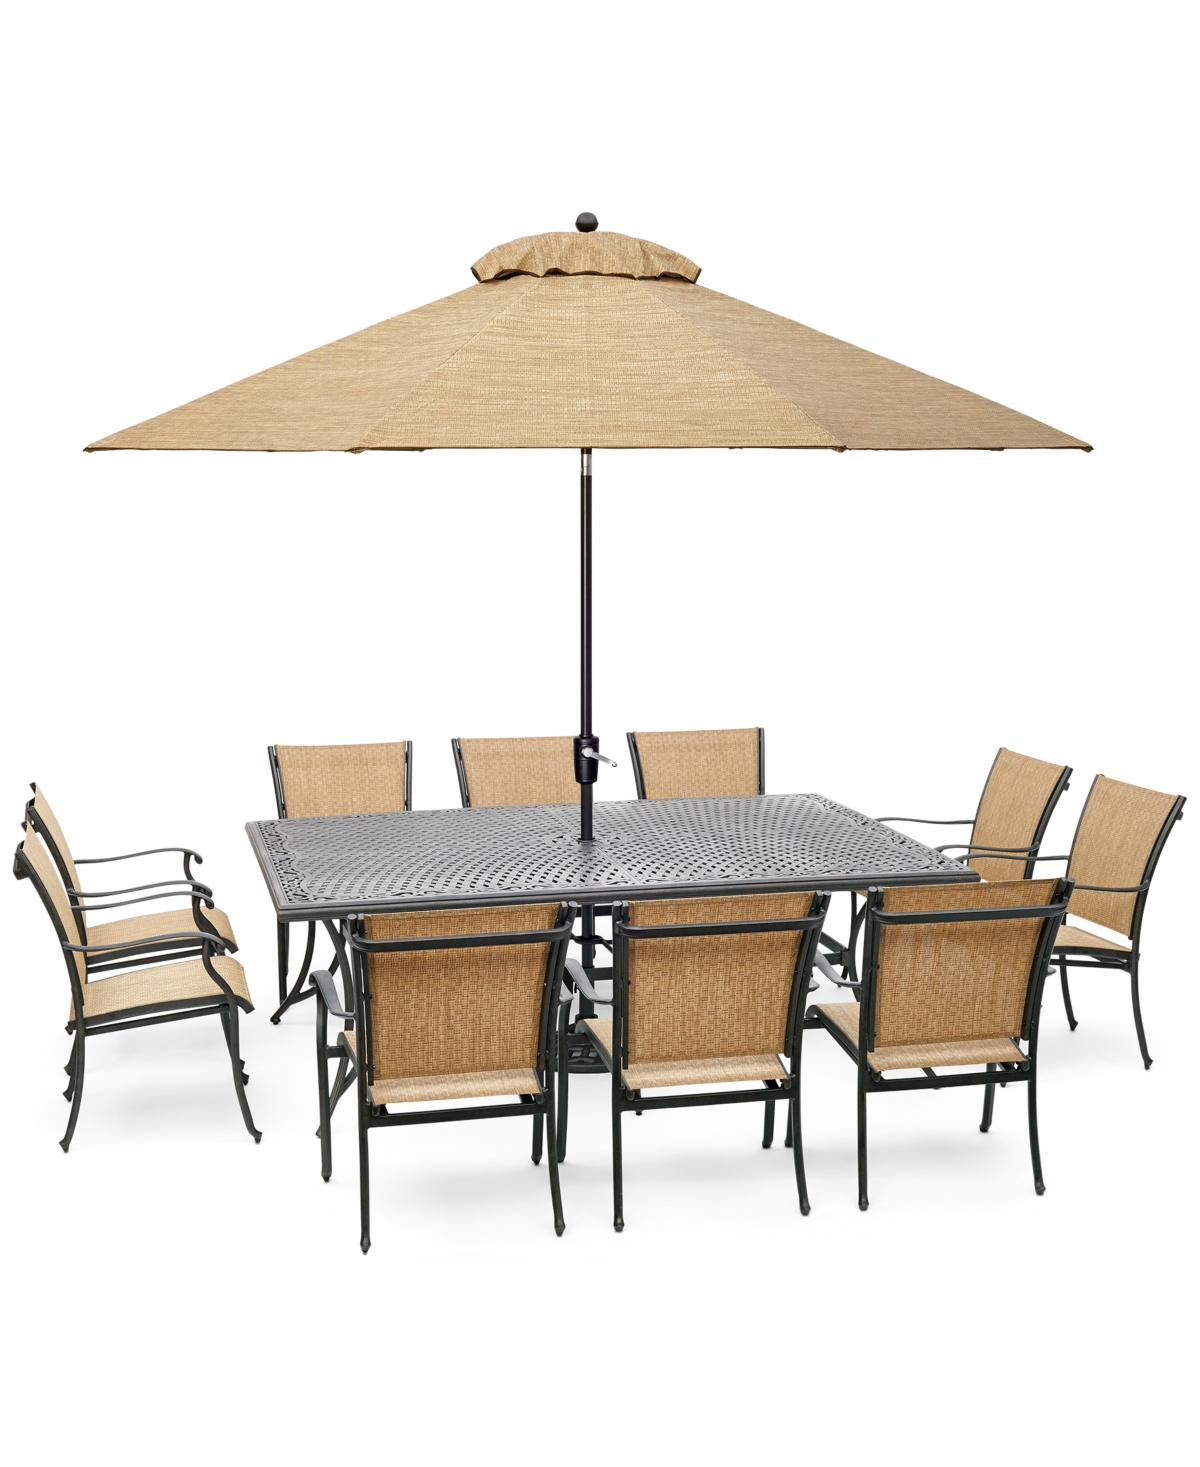 Beachmont Ii Outdoor 11-Pc. Dining Set (84 x 60 Dining Table and 10 Dining Chairs), Created for Macys